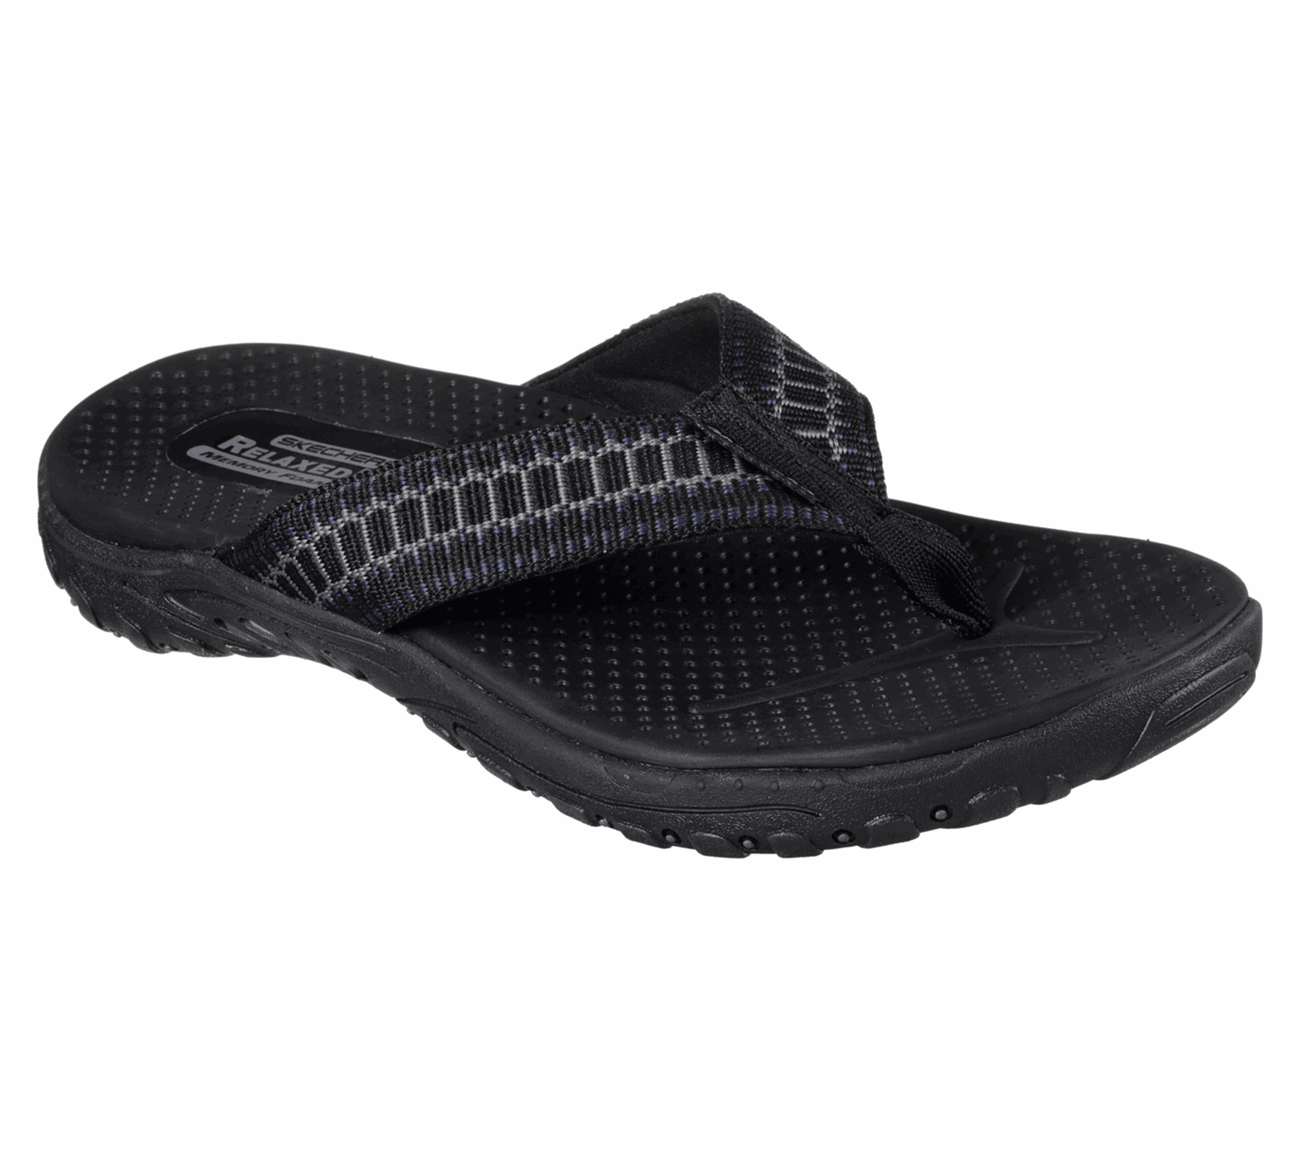 Buy SKECHERS Relaxed Fit: Reggae - Belano USA Casuals Shoes